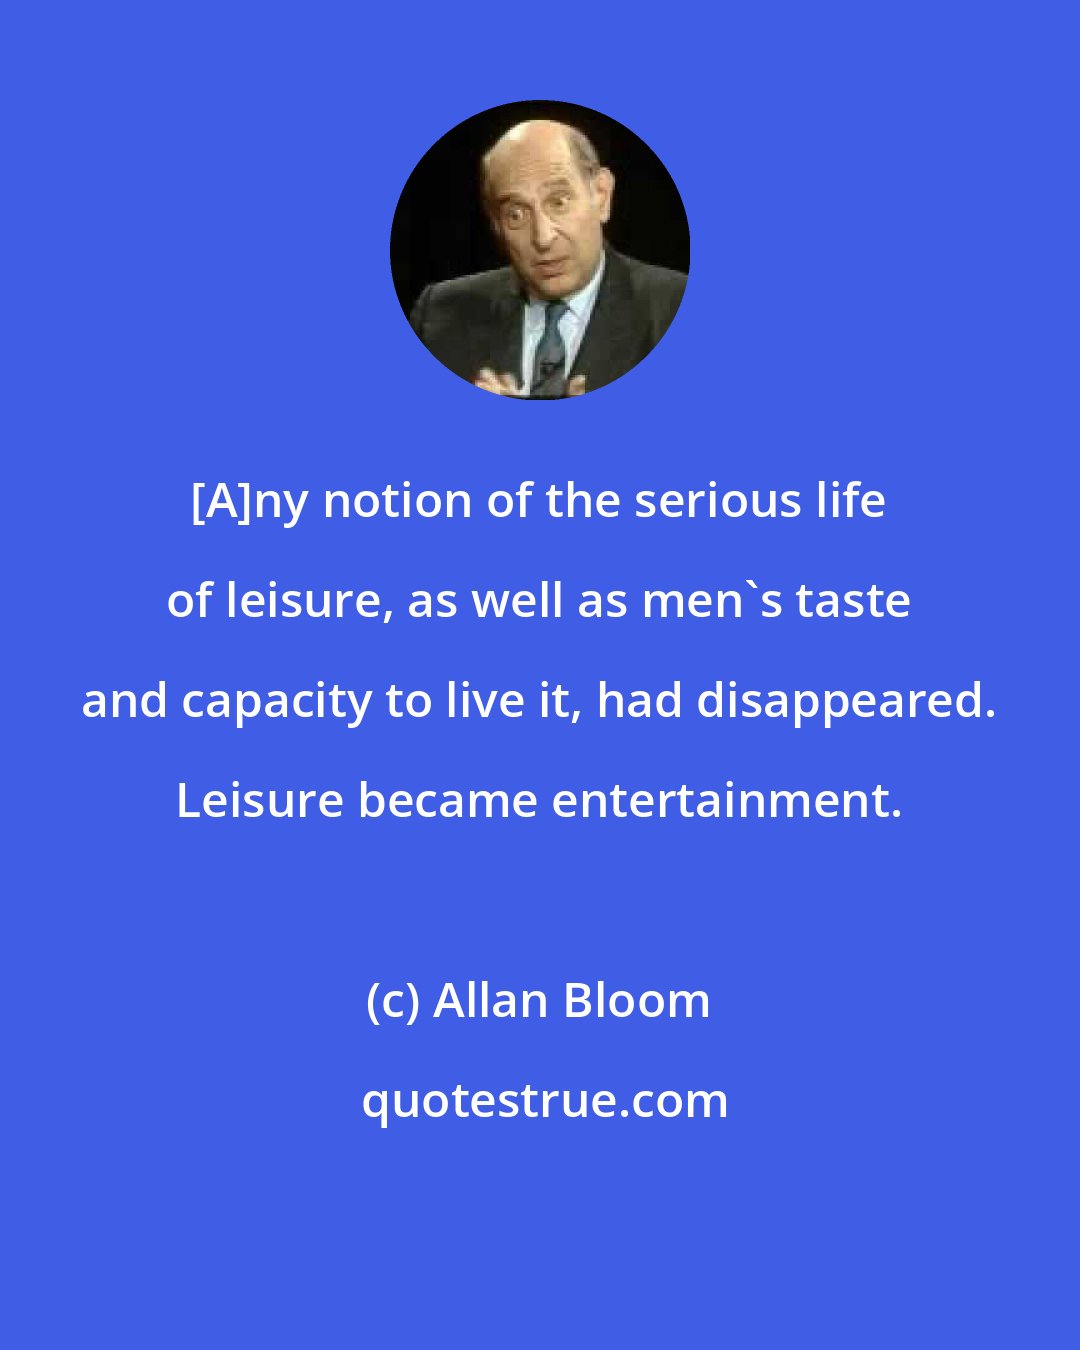 Allan Bloom: [A]ny notion of the serious life of leisure, as well as men's taste and capacity to live it, had disappeared. Leisure became entertainment.